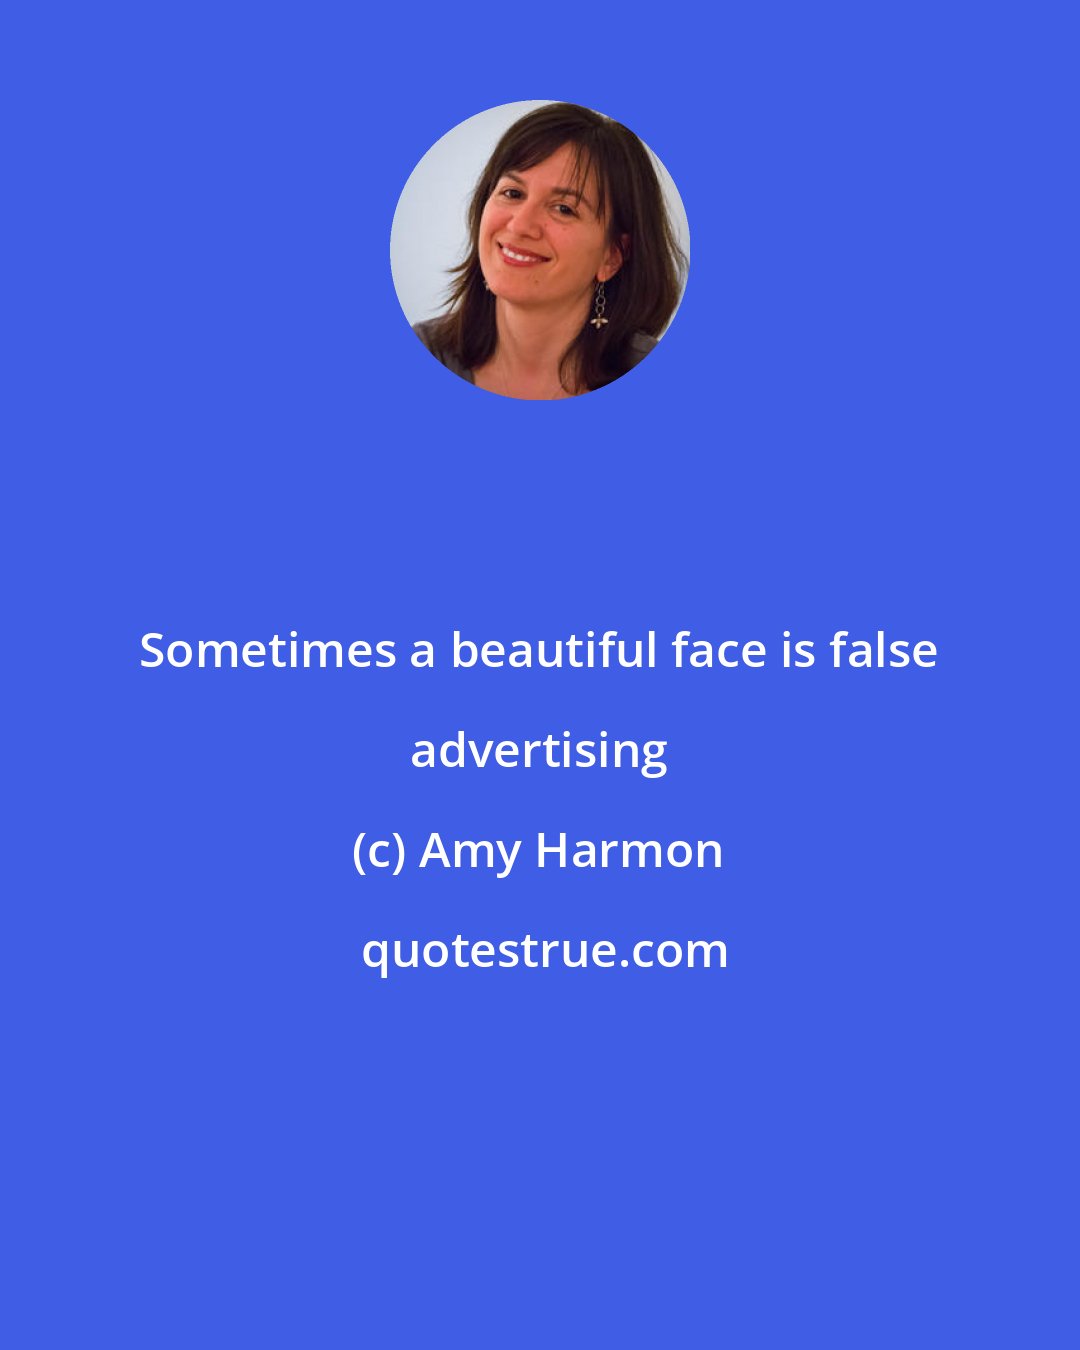 Amy Harmon: Sometimes a beautiful face is false advertising